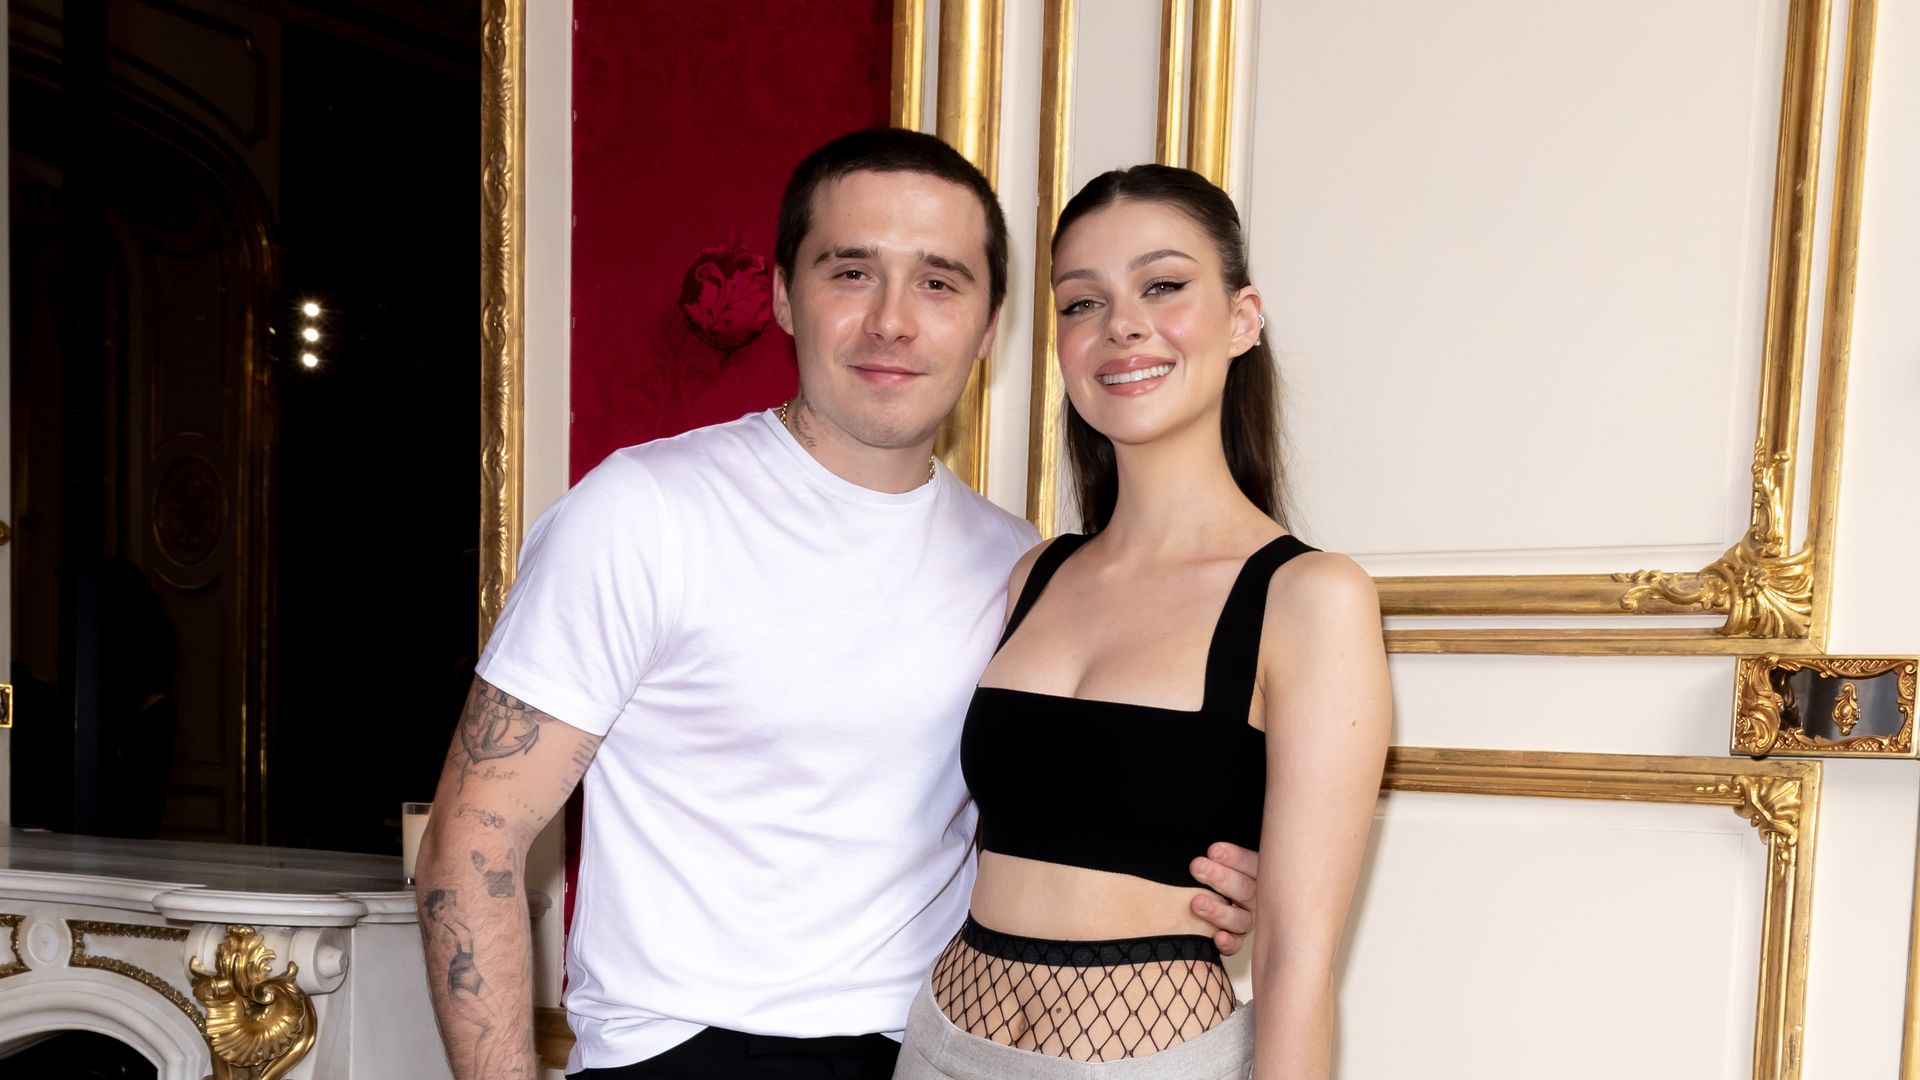 Brooklyn Beckham and Nicola Peltz celebrate 4 year anniversary with a  stylish throwback - see photos